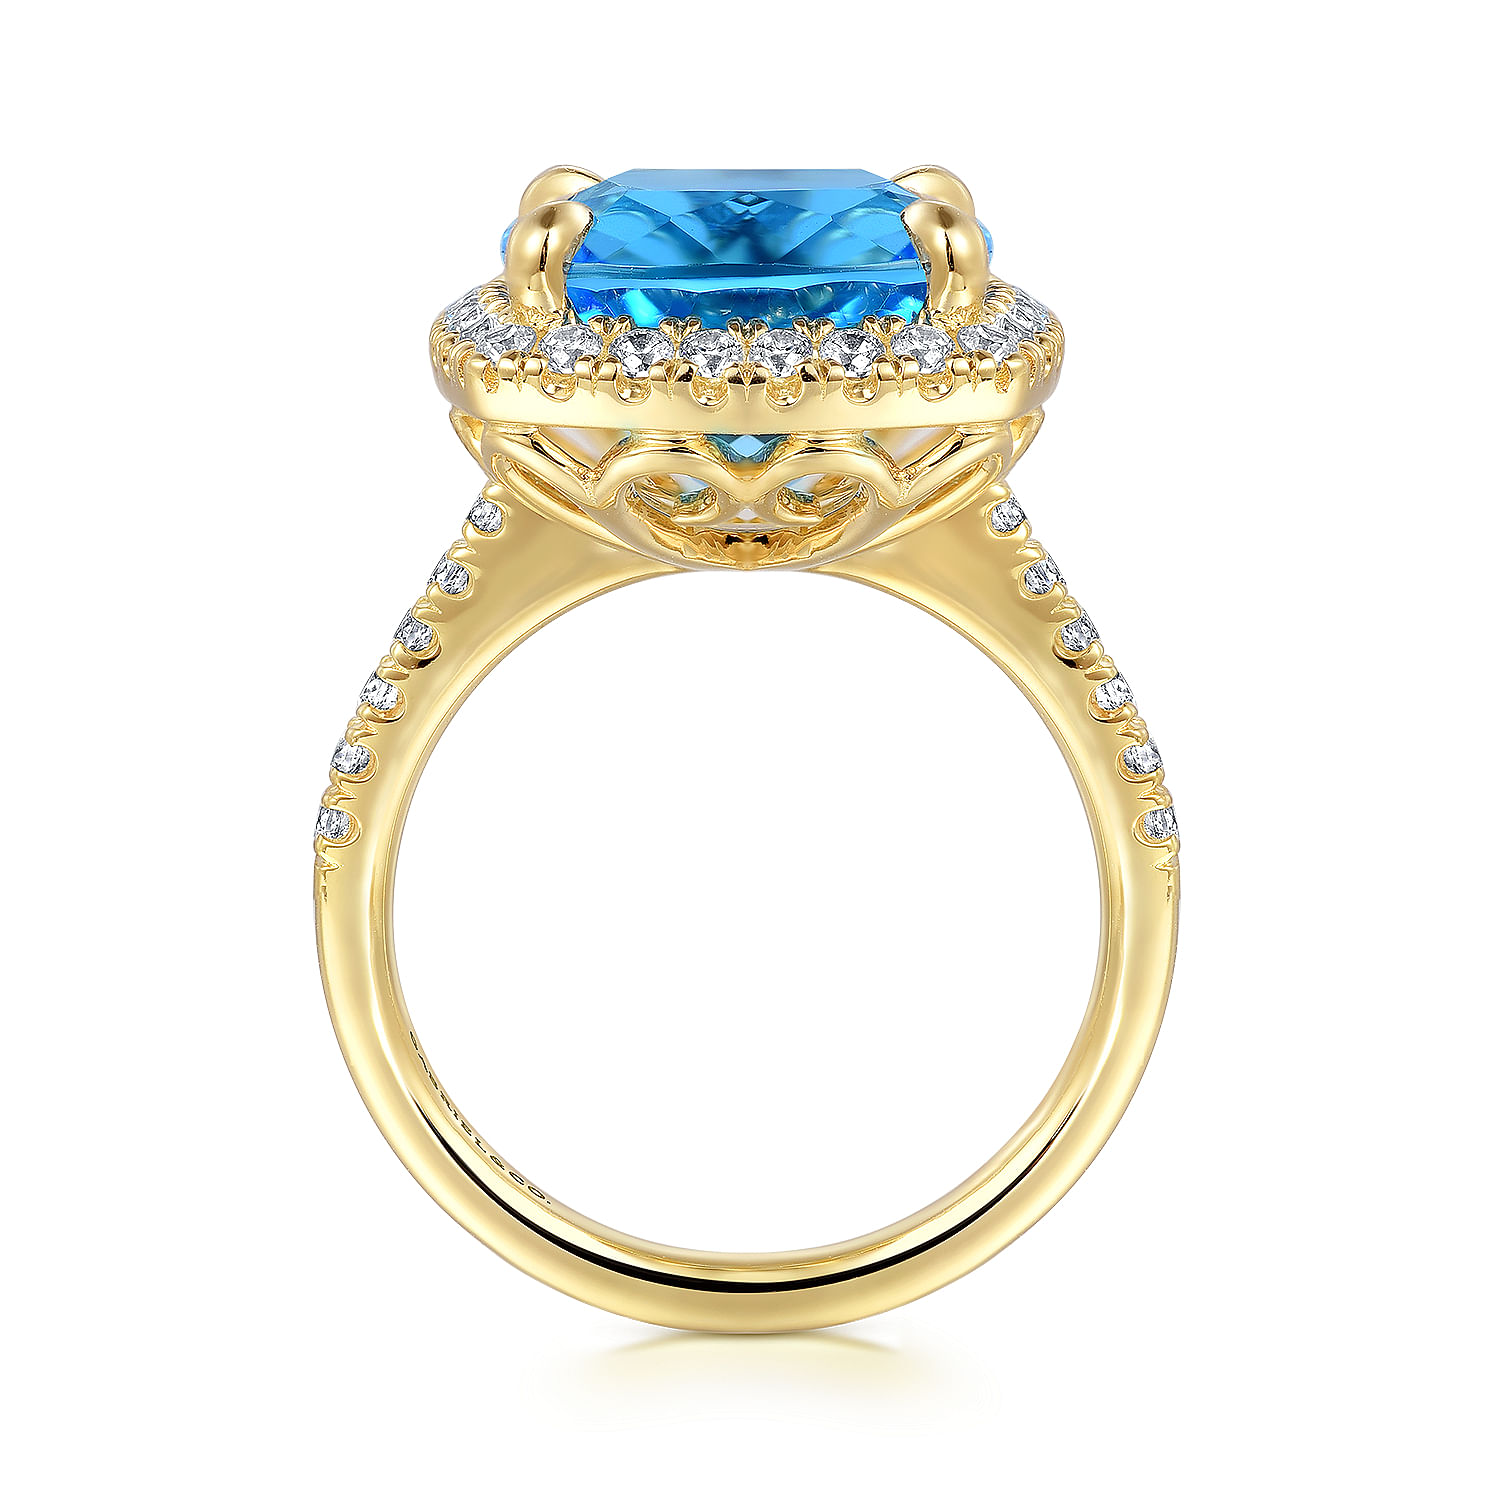 14K Yellow Gold Diamond and Blue Topaz Cushion Cut Ladies Ring With Flower Pattern Gallery